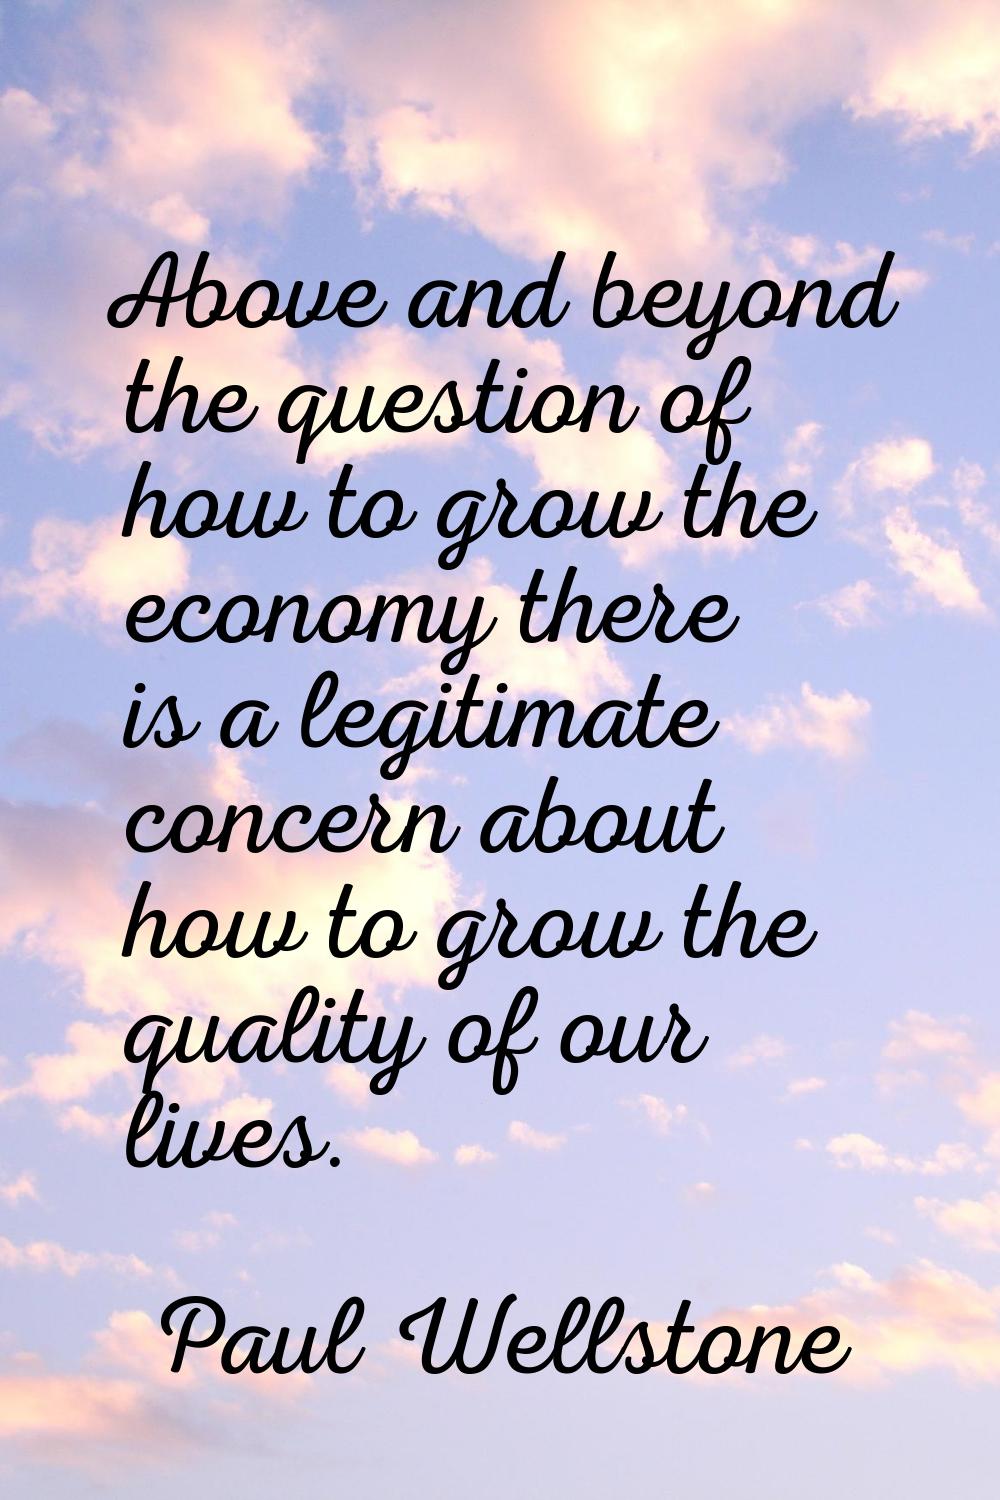 Above and beyond the question of how to grow the economy there is a legitimate concern about how to